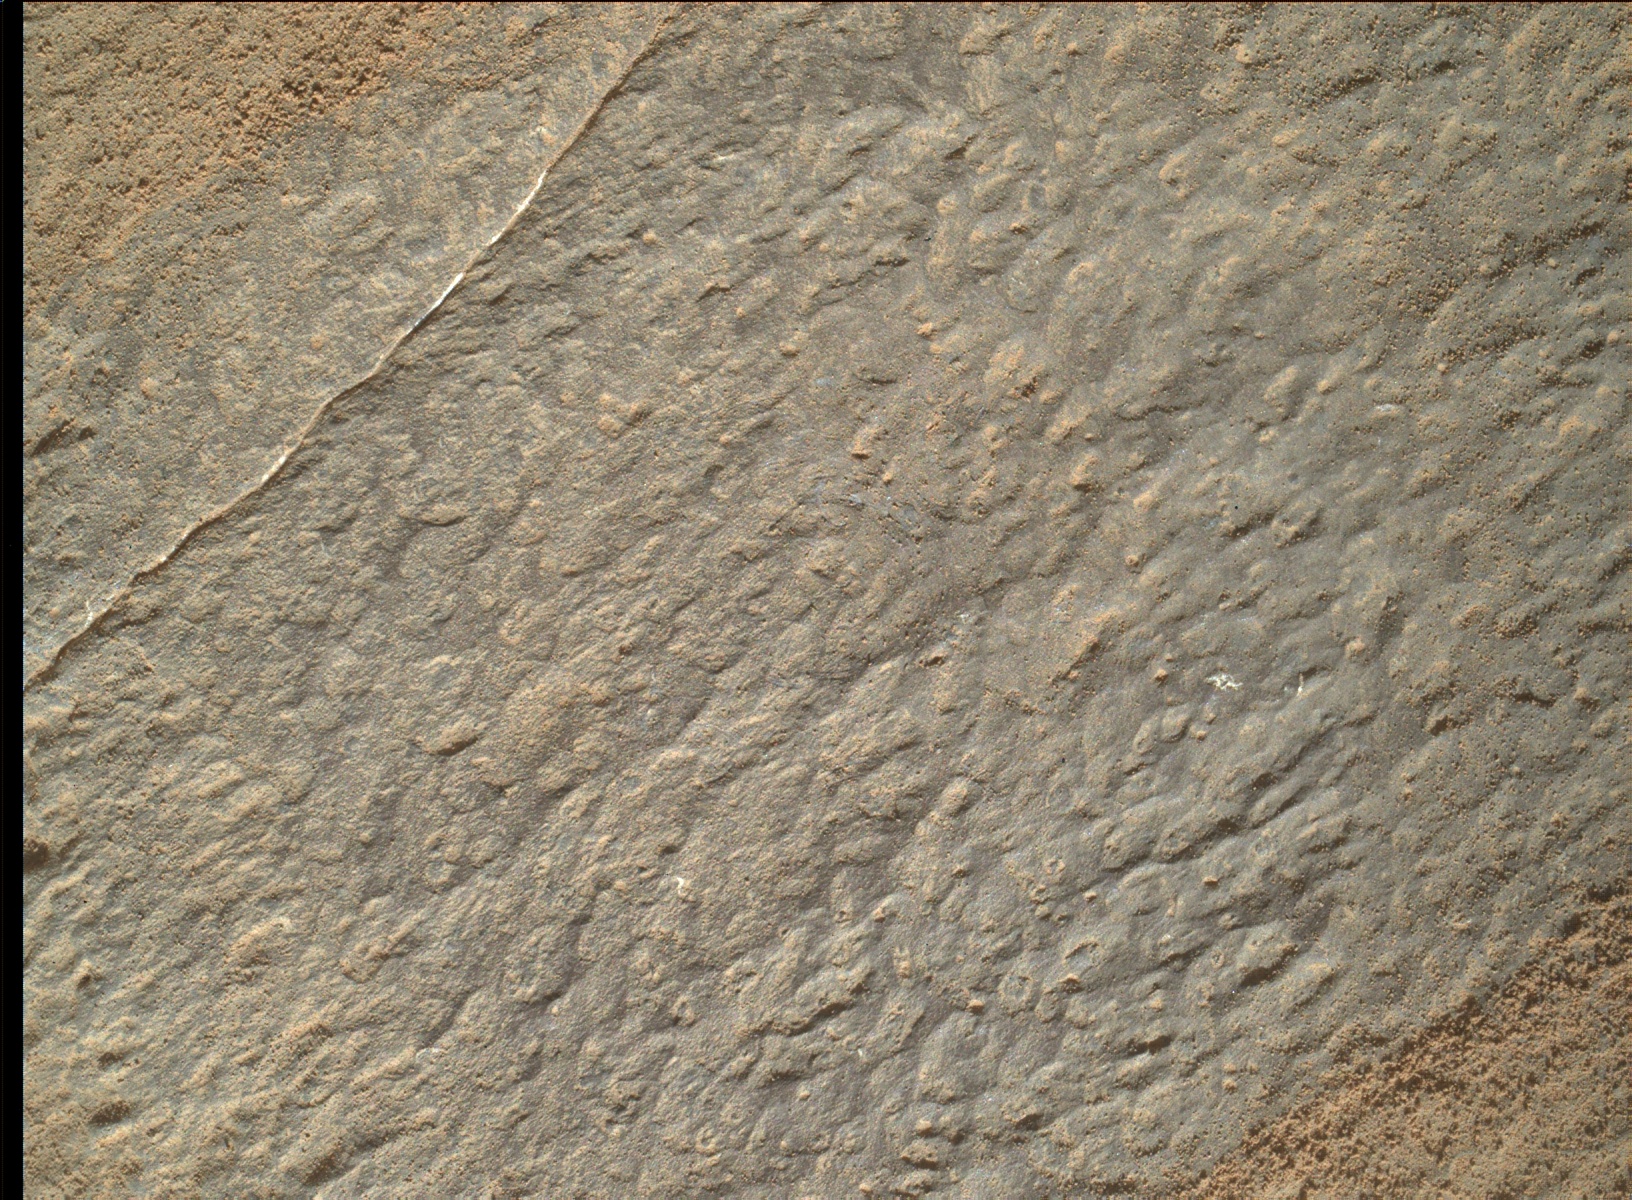 Nasa's Mars rover Curiosity acquired this image using its Mars Hand Lens Imager (MAHLI) on Sol 1266